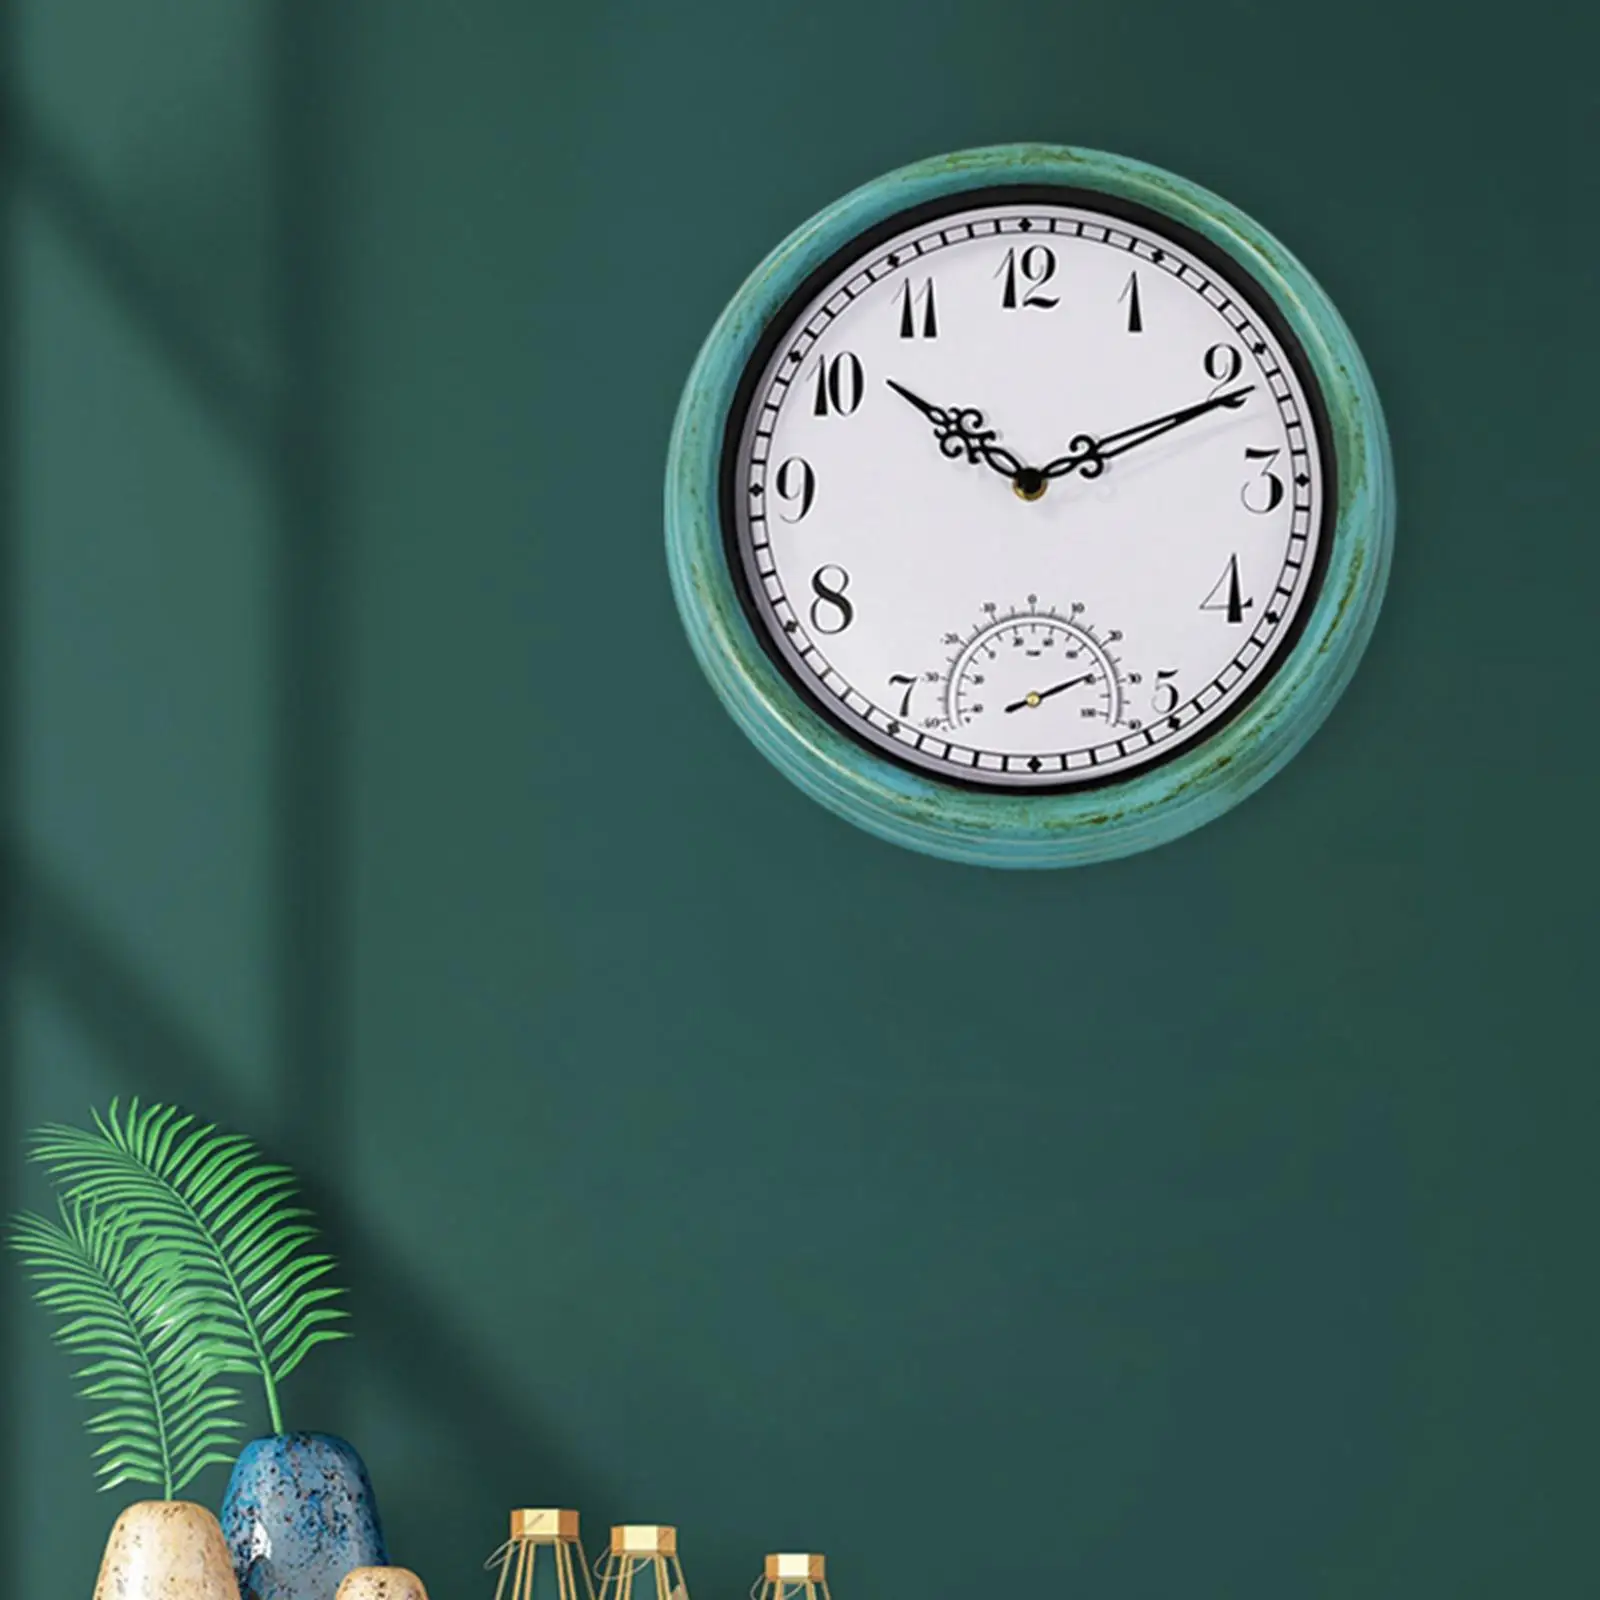 12 inch Wall Clock Accuracy Silent No Ticking Round Clock Wall Decorative for Outdoor Indoor Patio Fence Kitchen Sauna Room